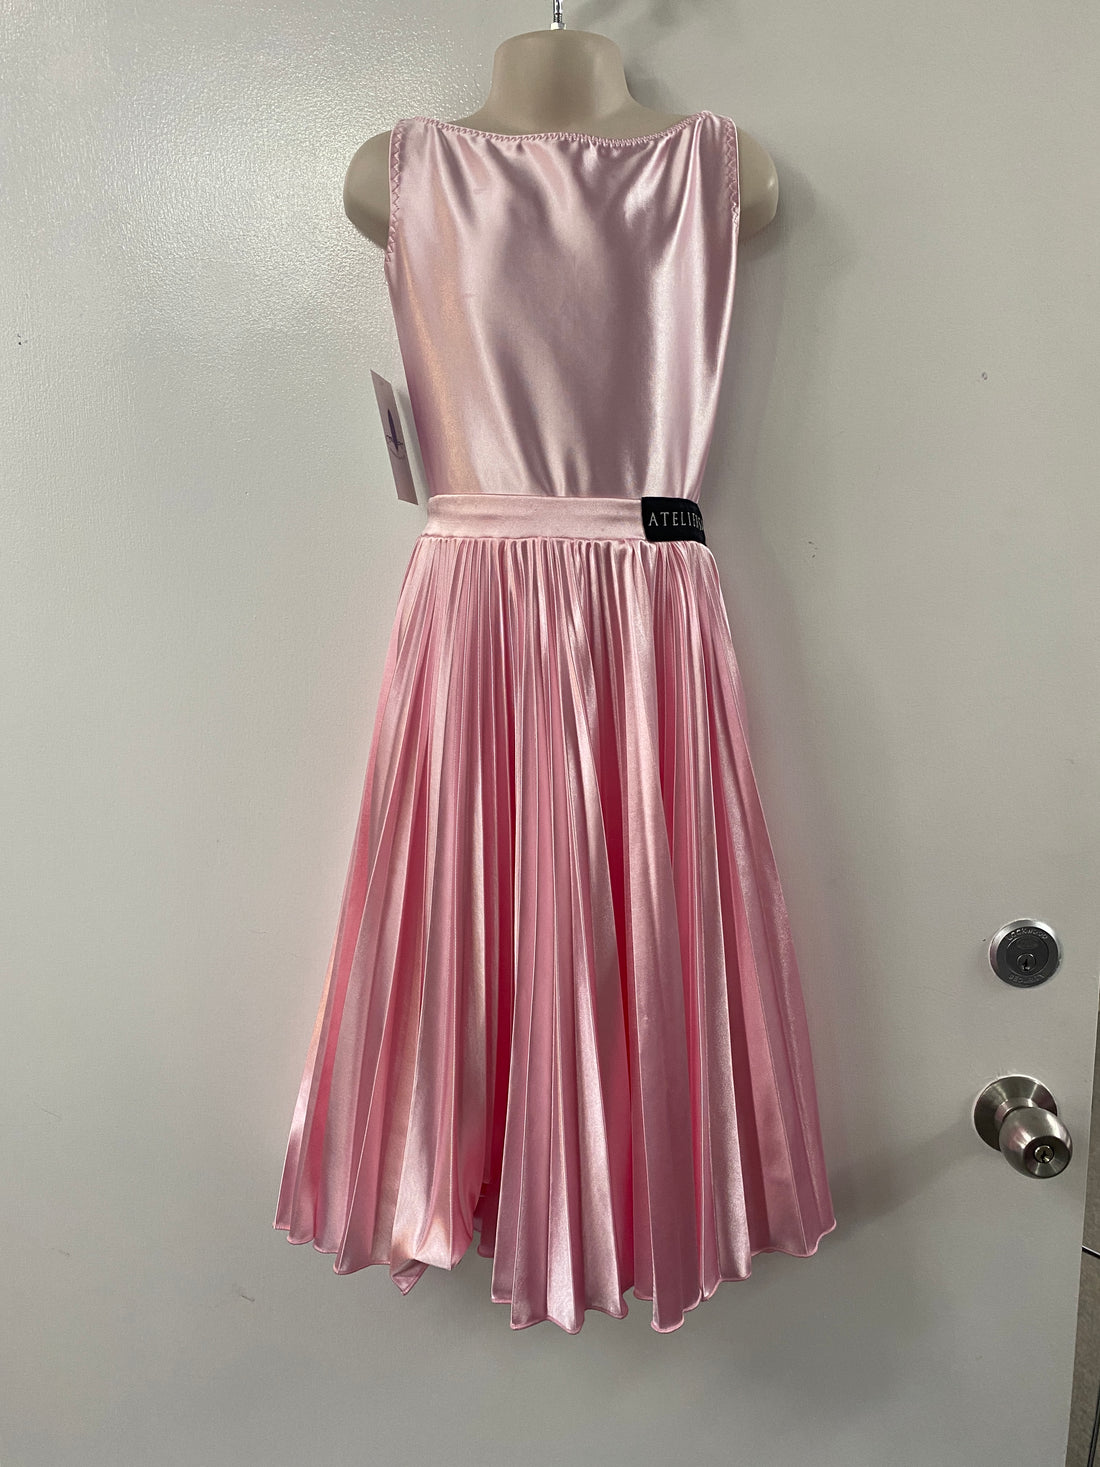 Pre Loved 3 Piece Juvenile Dress in Baby Pink (Size 10-12)